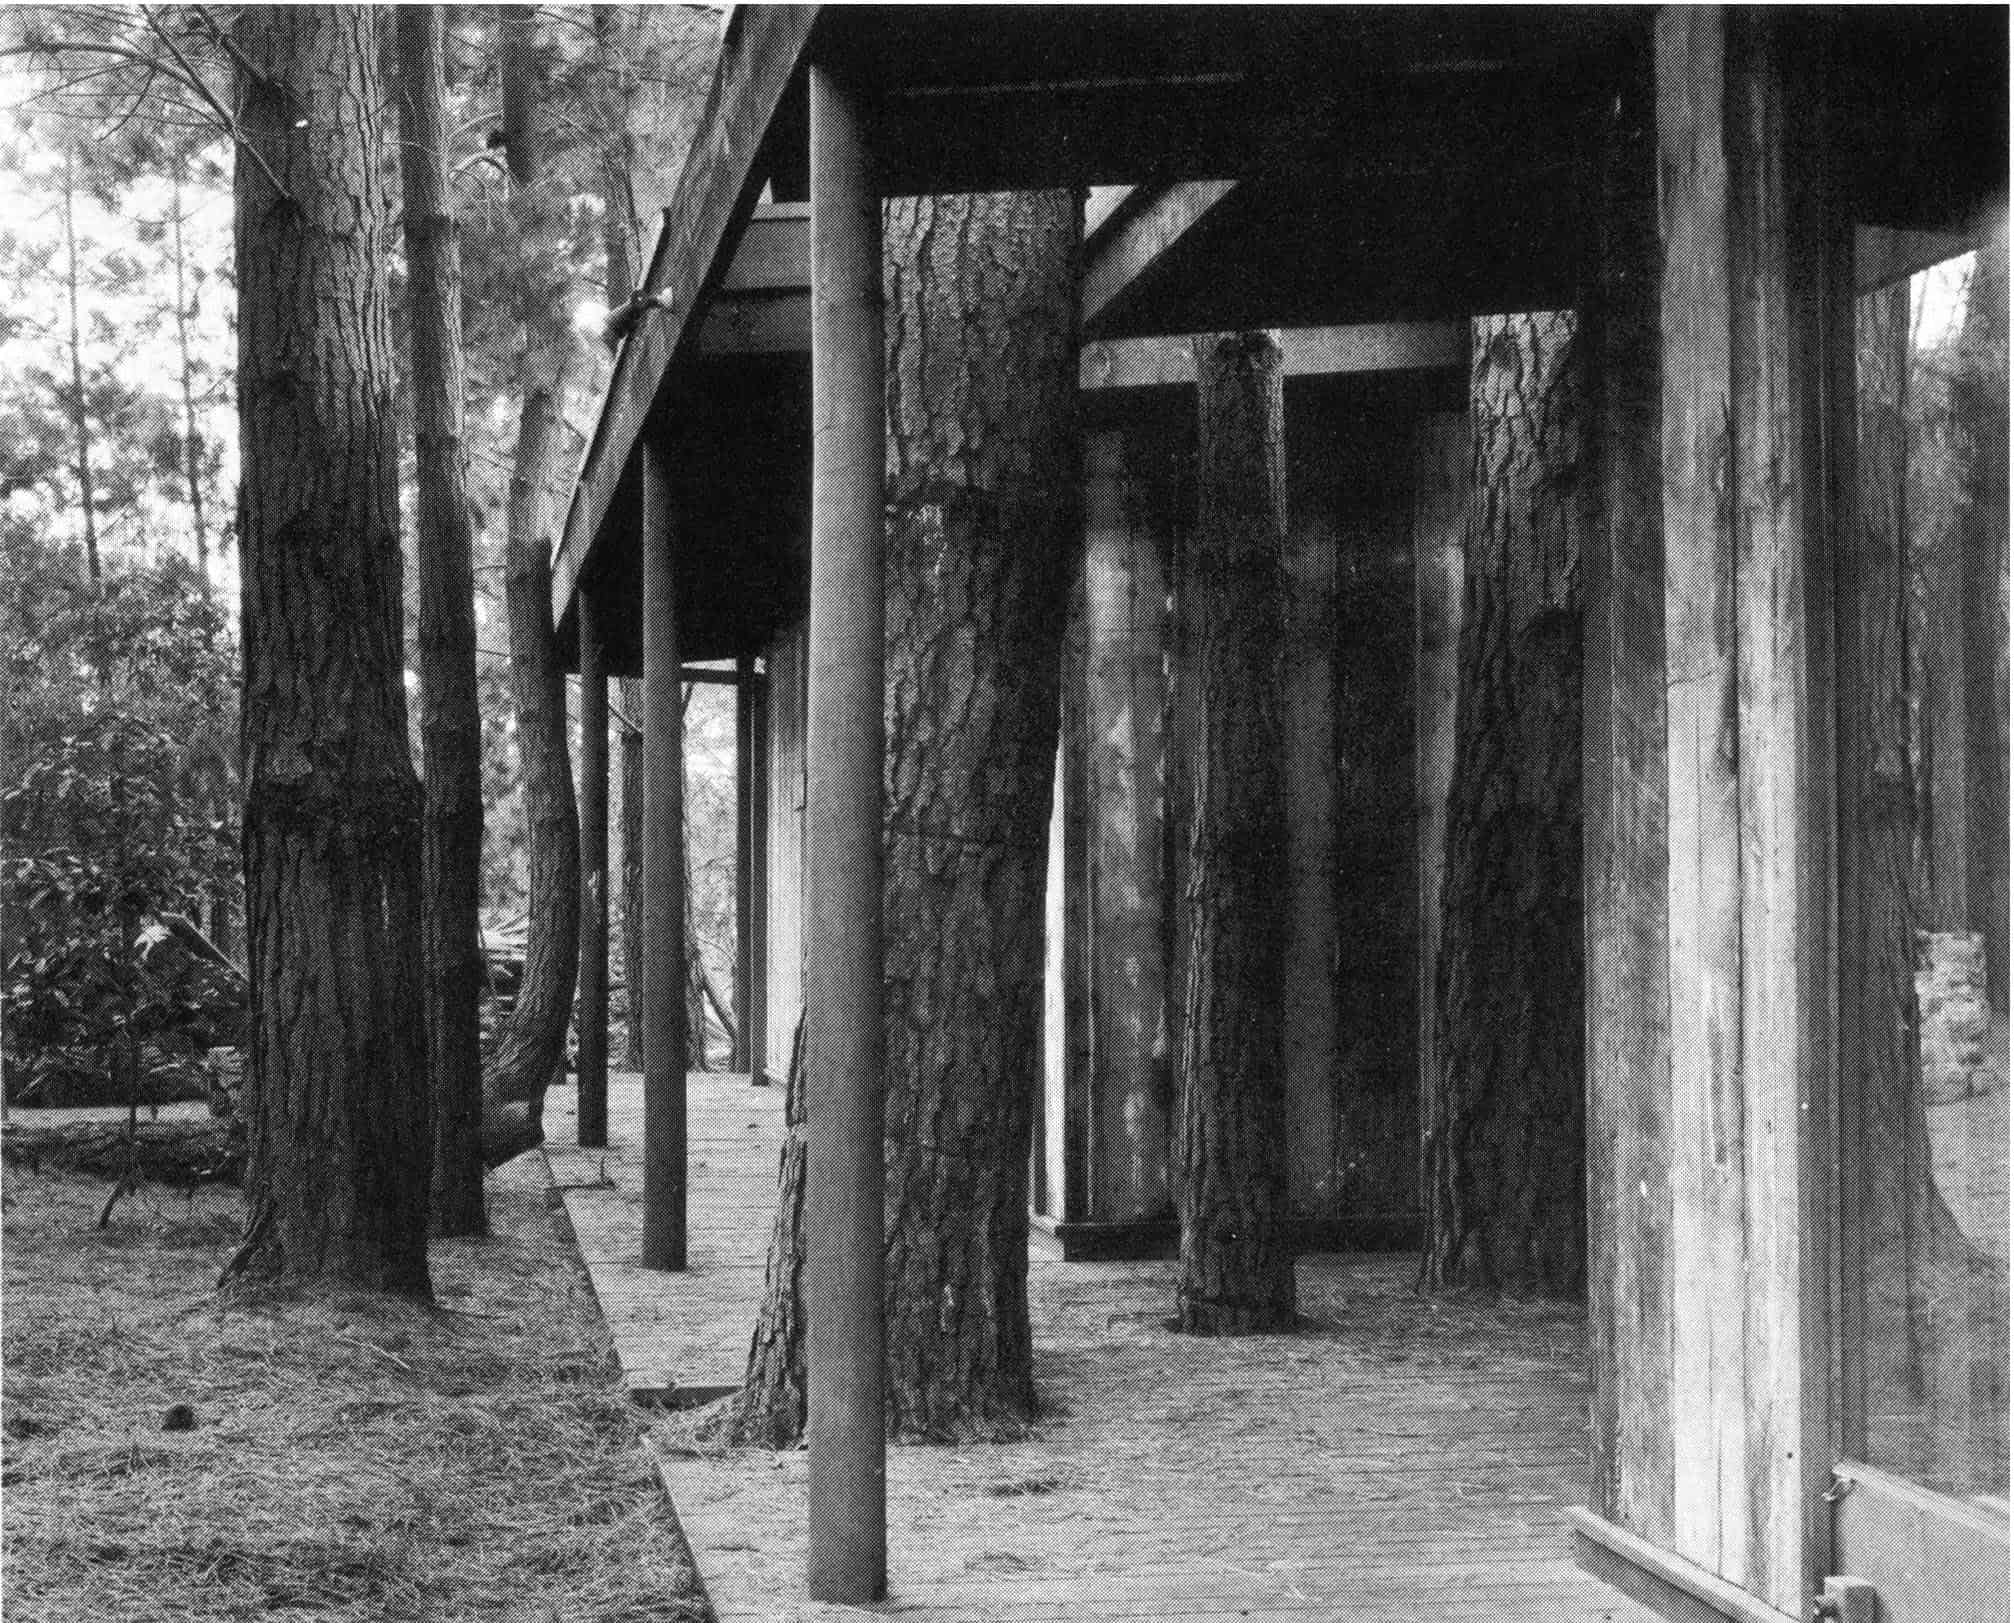 Marks House, Mt. Martha, built to accommodate existing trees Source: Knox